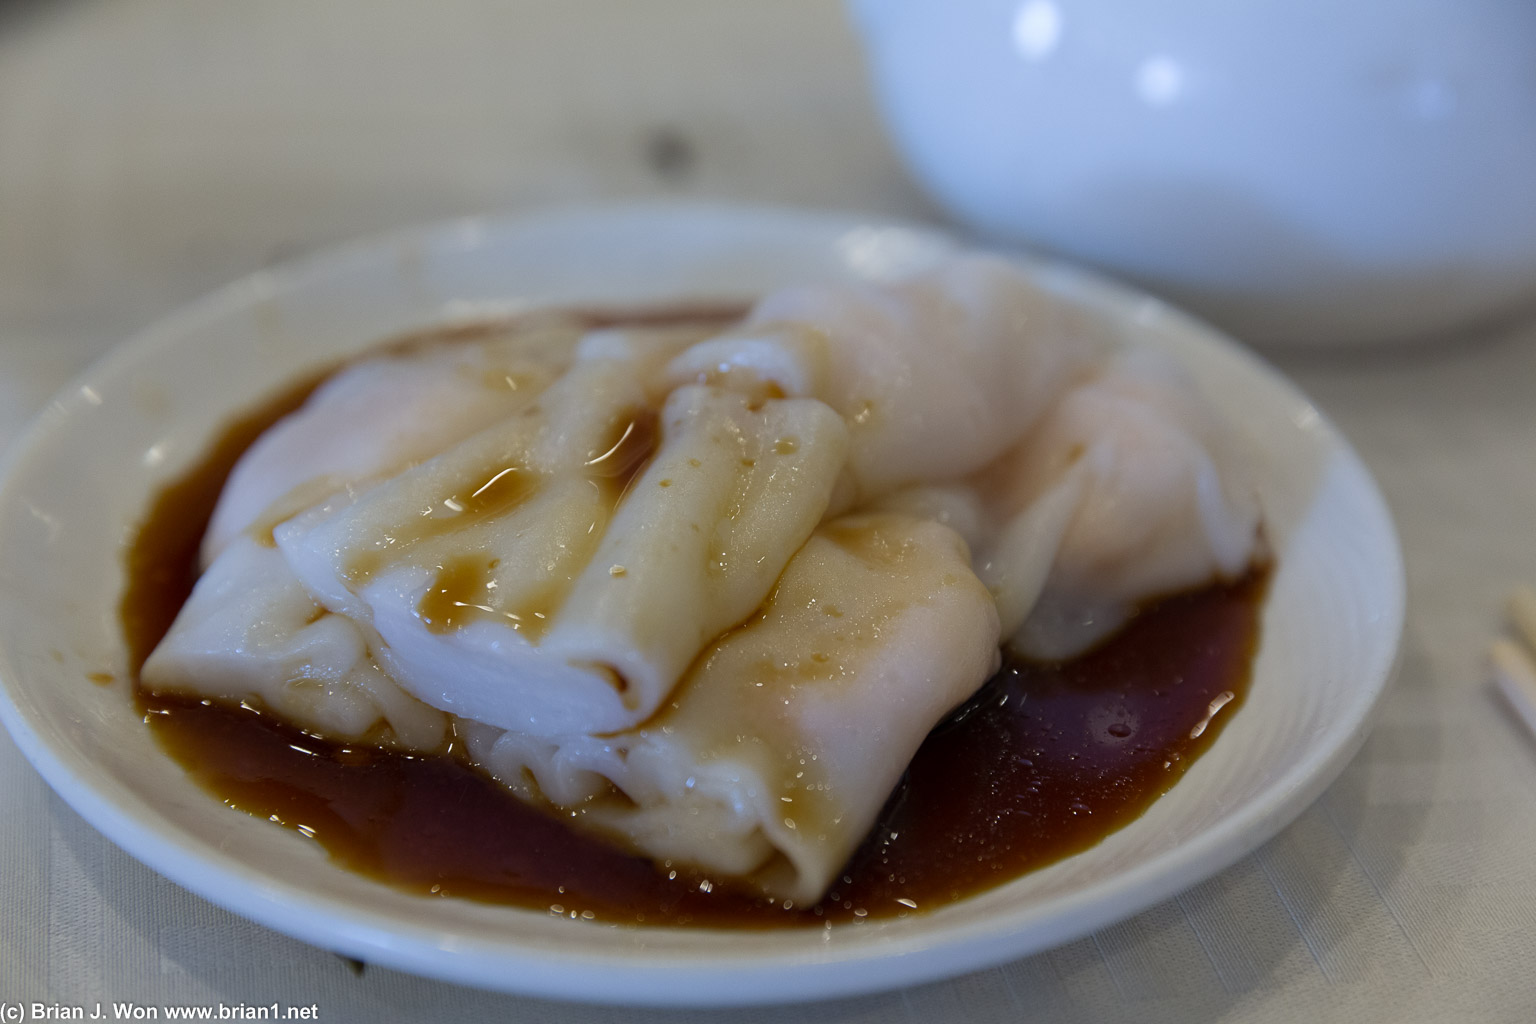 Har cheung fun. Just okay, skins a little too thick and shrimp were merely adequate.